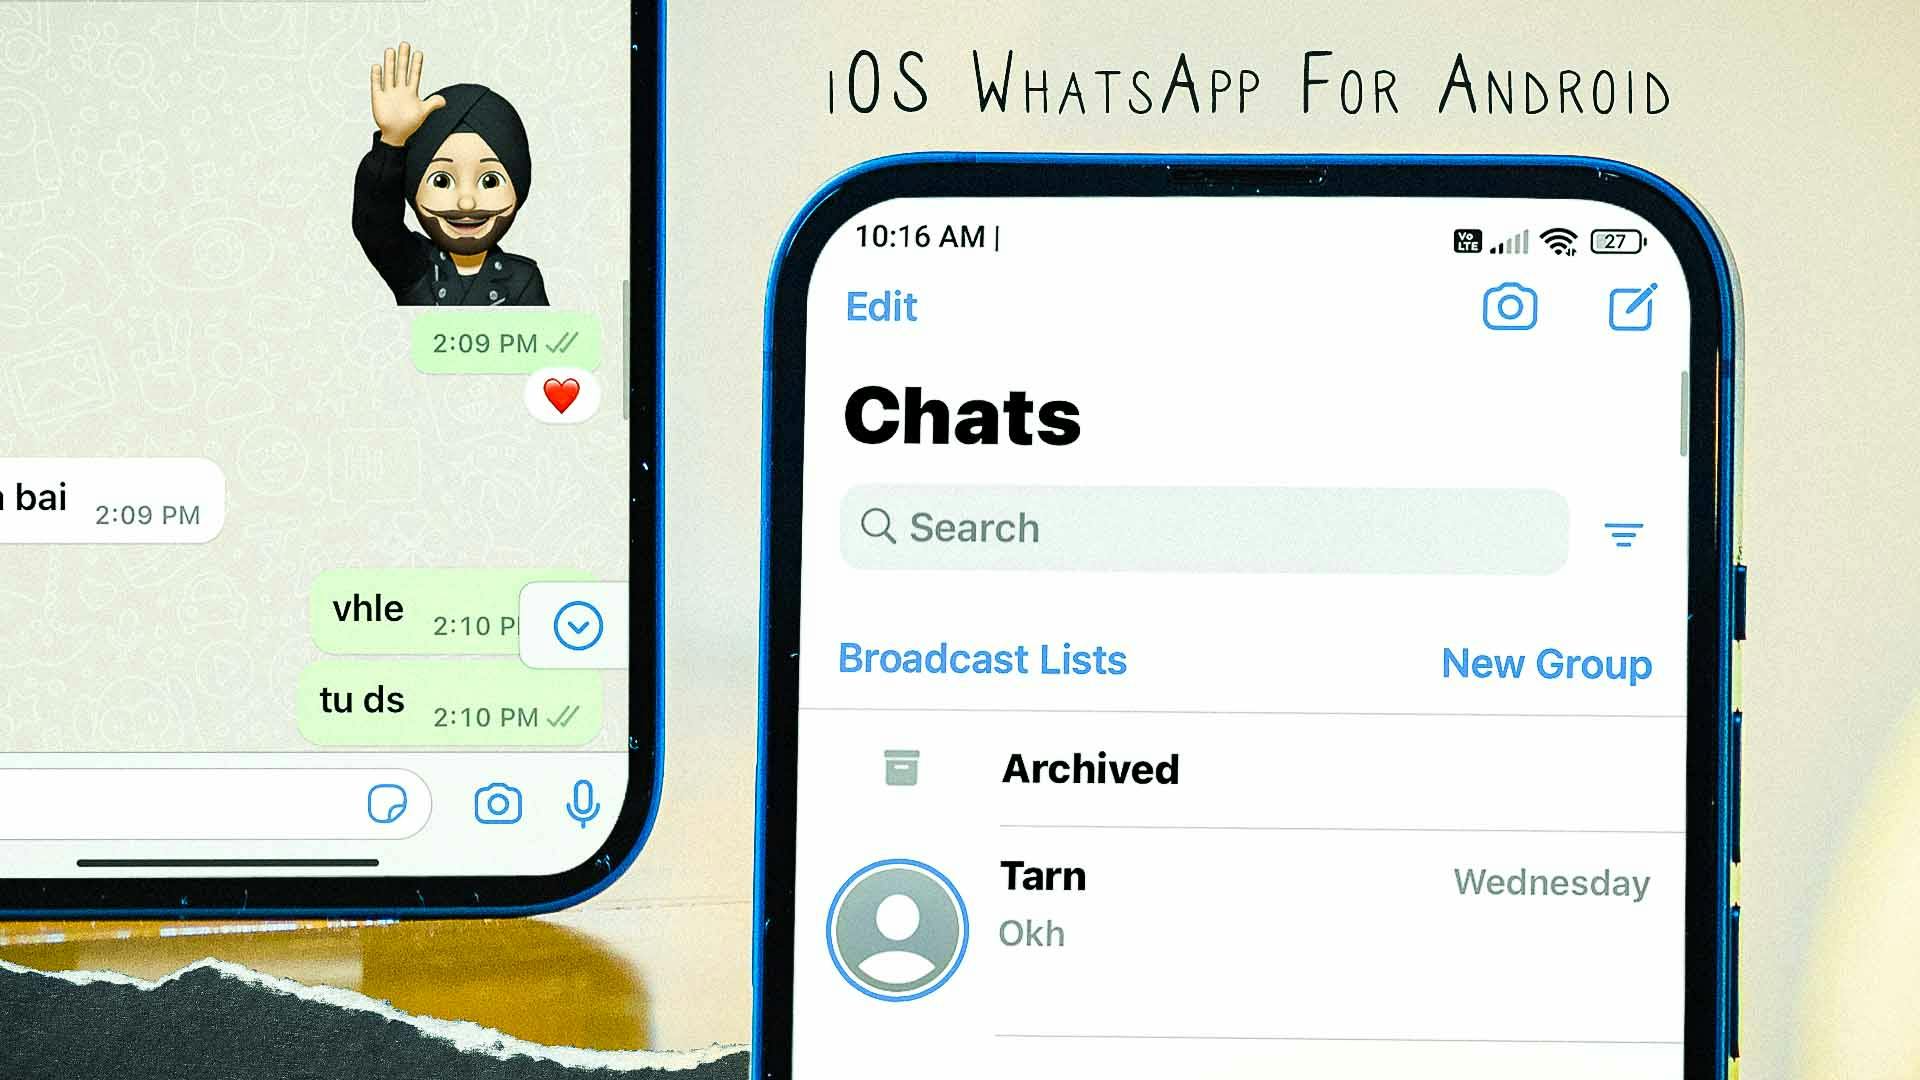 Exploring the Latest Update of iOS WhatsApp v9.63: How to Install on Android Devices